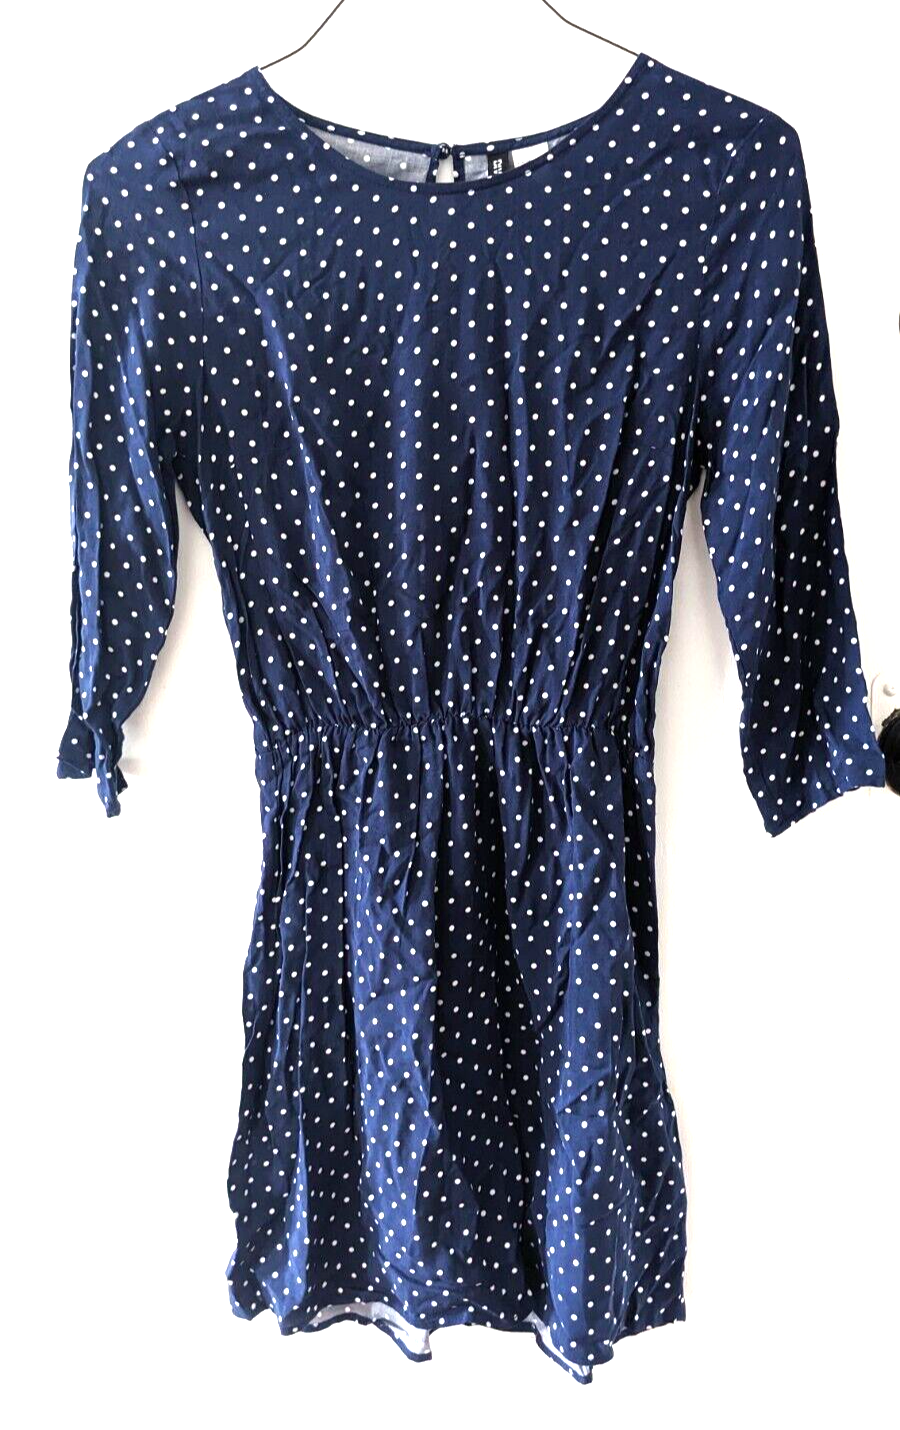 Primary image for H&M navy blue polka dot print pattern dress women's size 4 SMALL knee-length hm